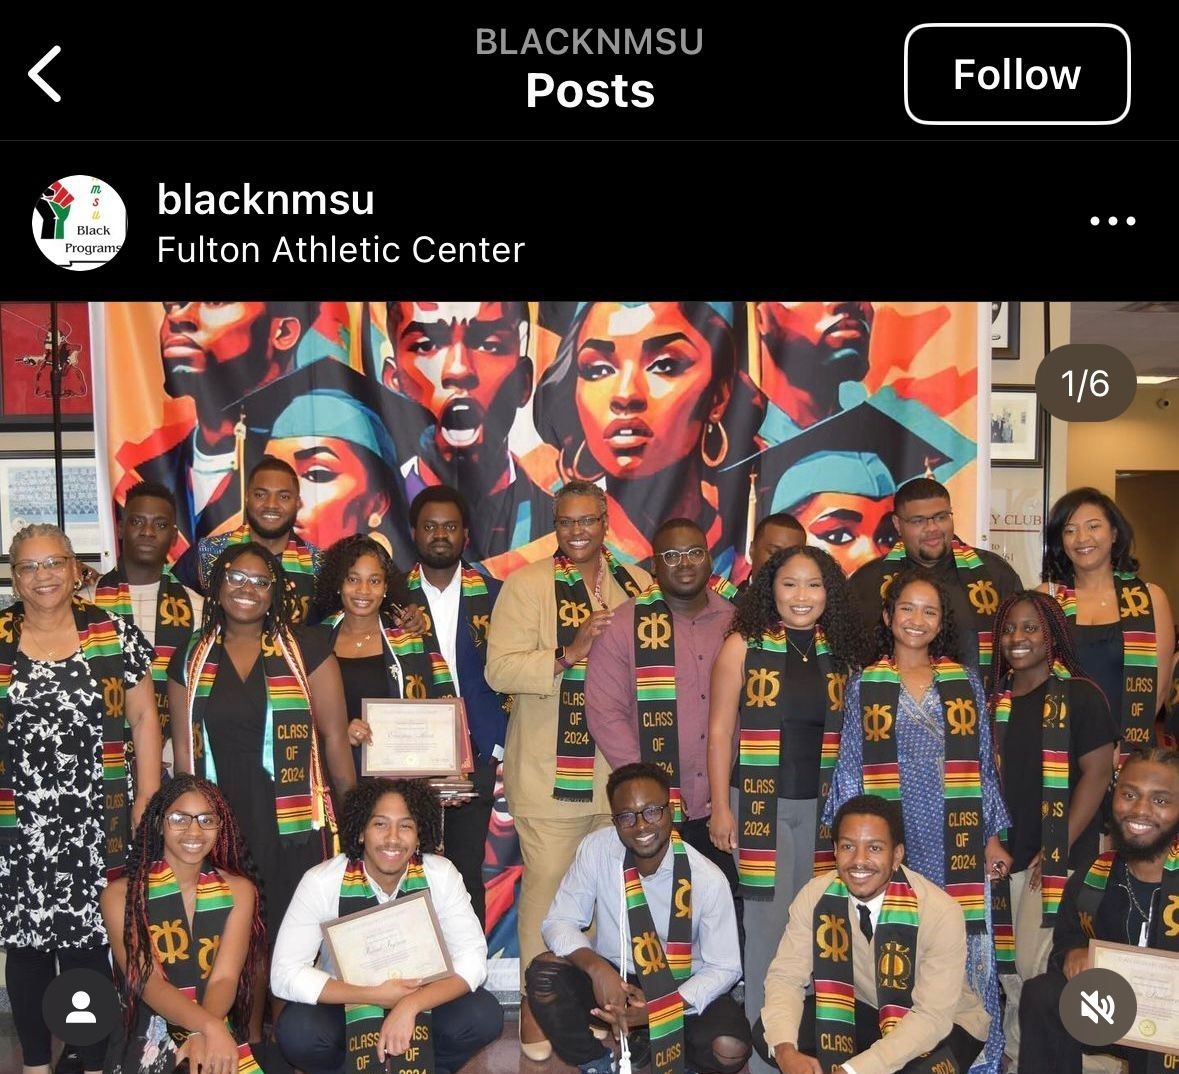 The image shows a group of people posing for a picture, likely in celebration or recognition event. They are all wearing black, green, and red stoles that say "Class of 2024". Everyone in the group is smiling. In the background, there is a vibrant mural depicting several faces in colorful, abstract styles, including a portrait of a woman and a man wearing a graduation cap. The group consists of around twenty individuals, both sitting and standing, in an indoor setting. Some people are holding certificates. Above the group, there is a black banner featuring the words "BLACKNMSU" at the top and an Instagram-style interface showing the account "blacknmsu," which is located at the Fulton Athletic Center.